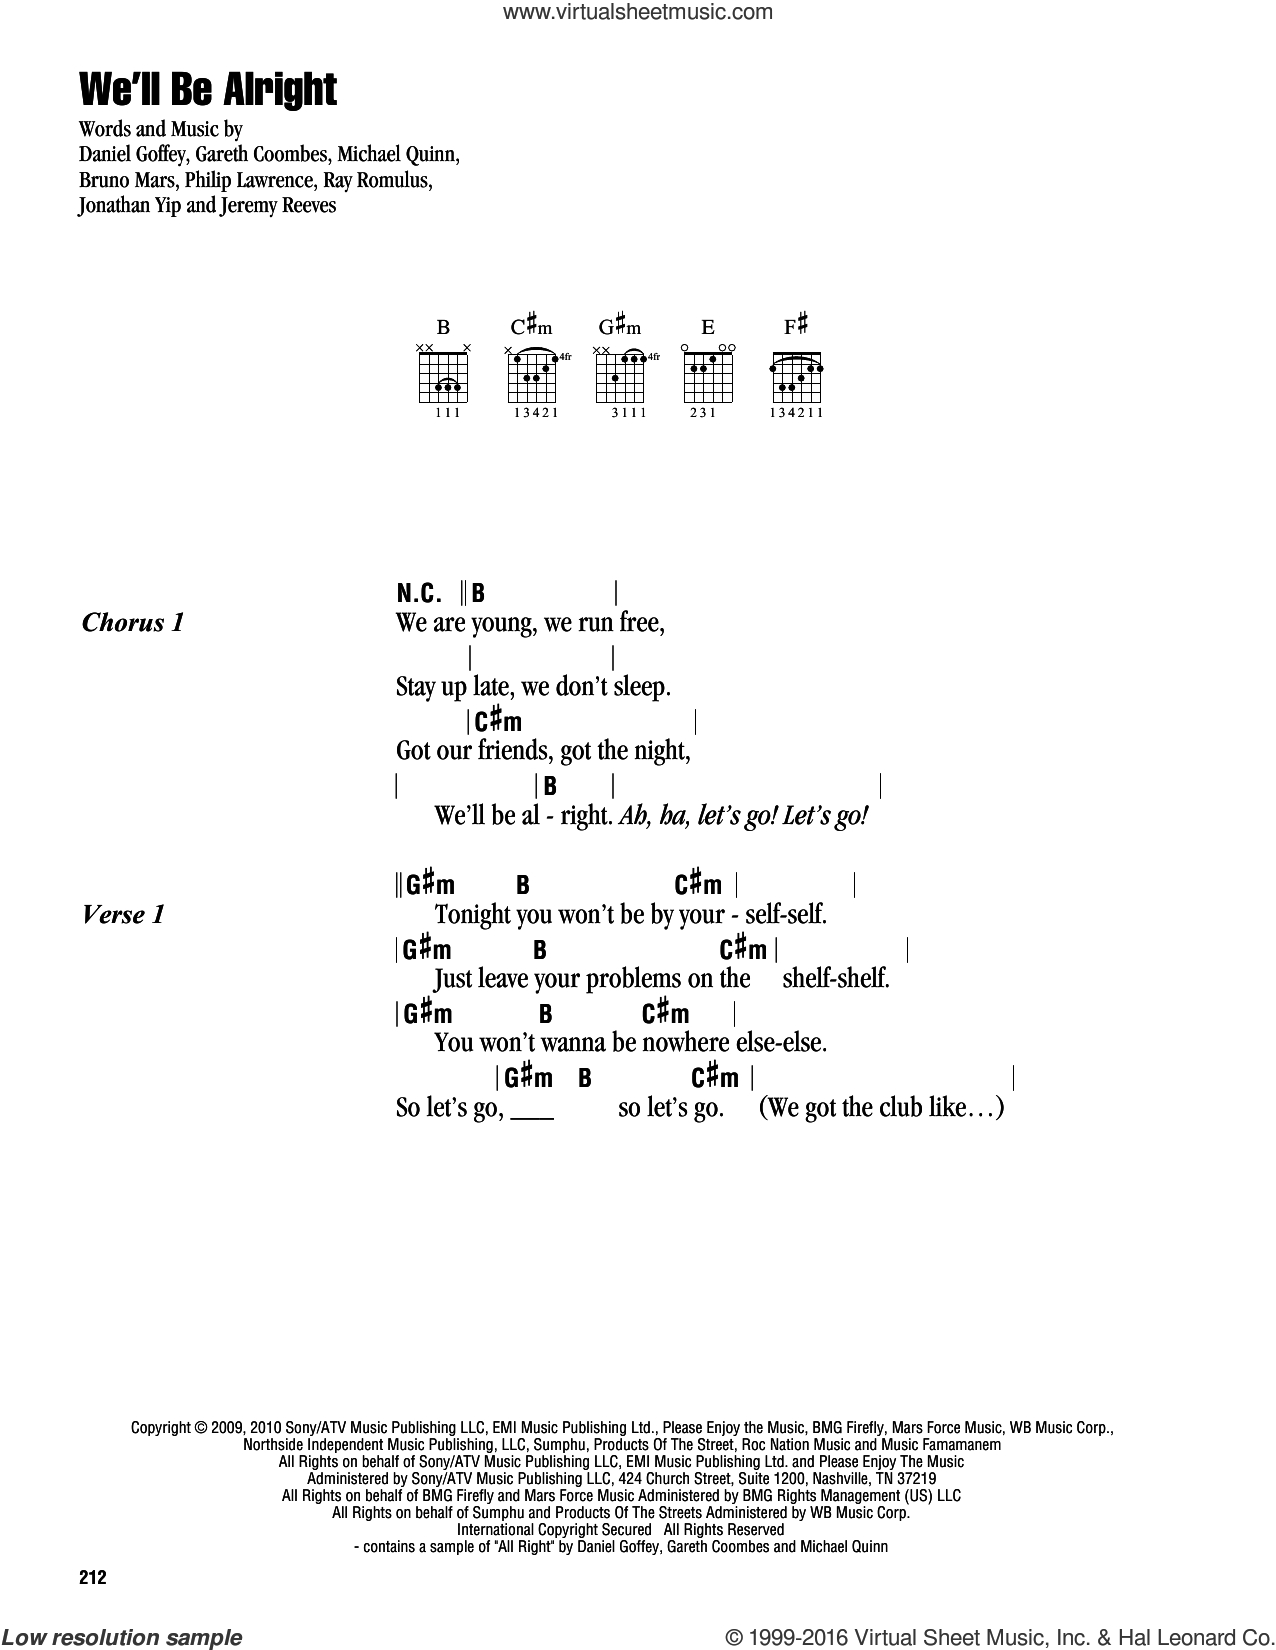 We Are Young Chords Mccoy Well Be Alright Sheet Music For Guitar Chords Pdf